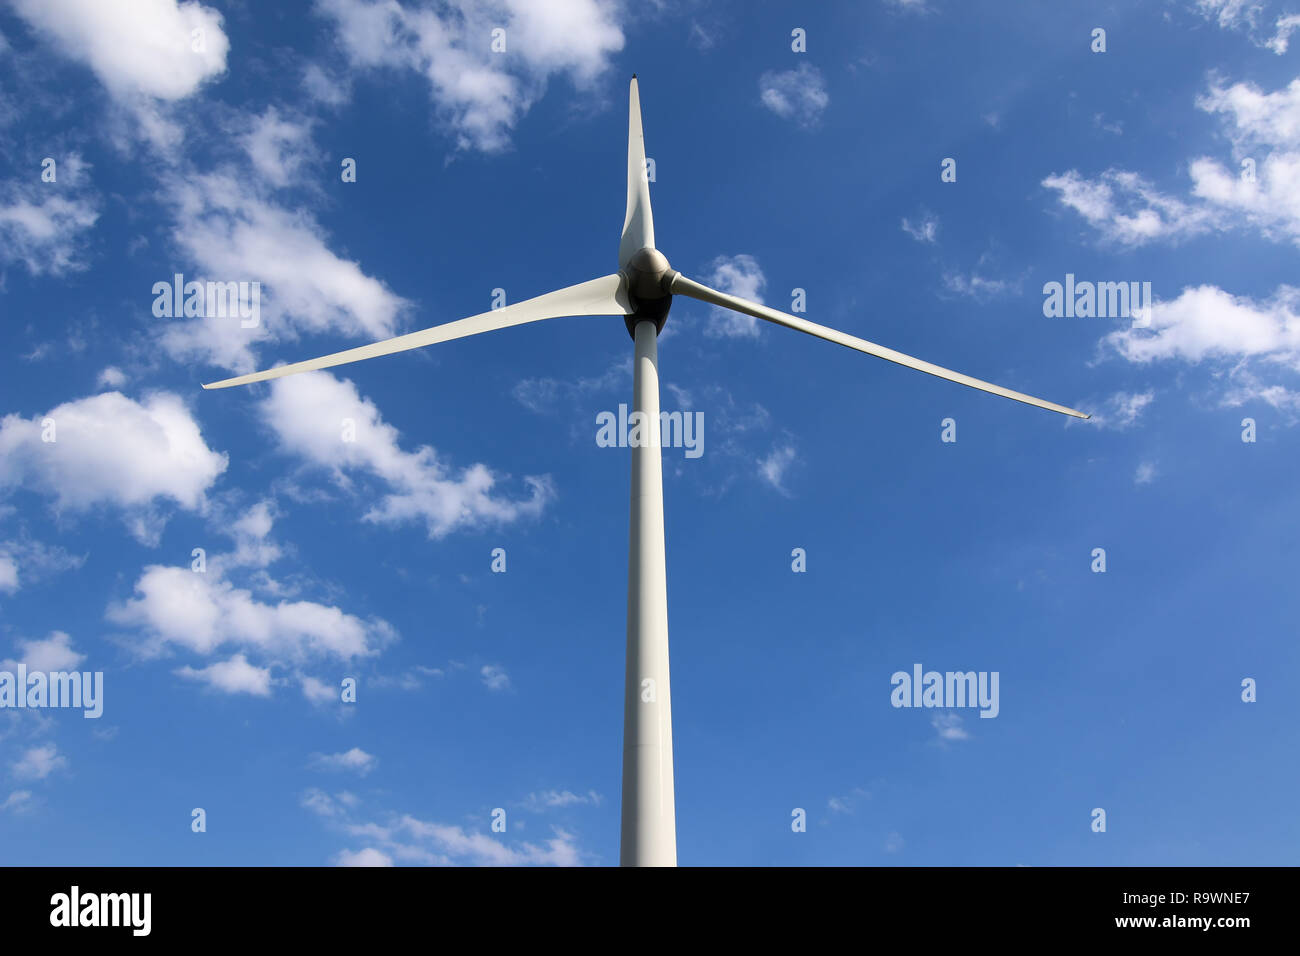 Image of the eco power, wind power plant - wind turbine - clean energy Stock Photo